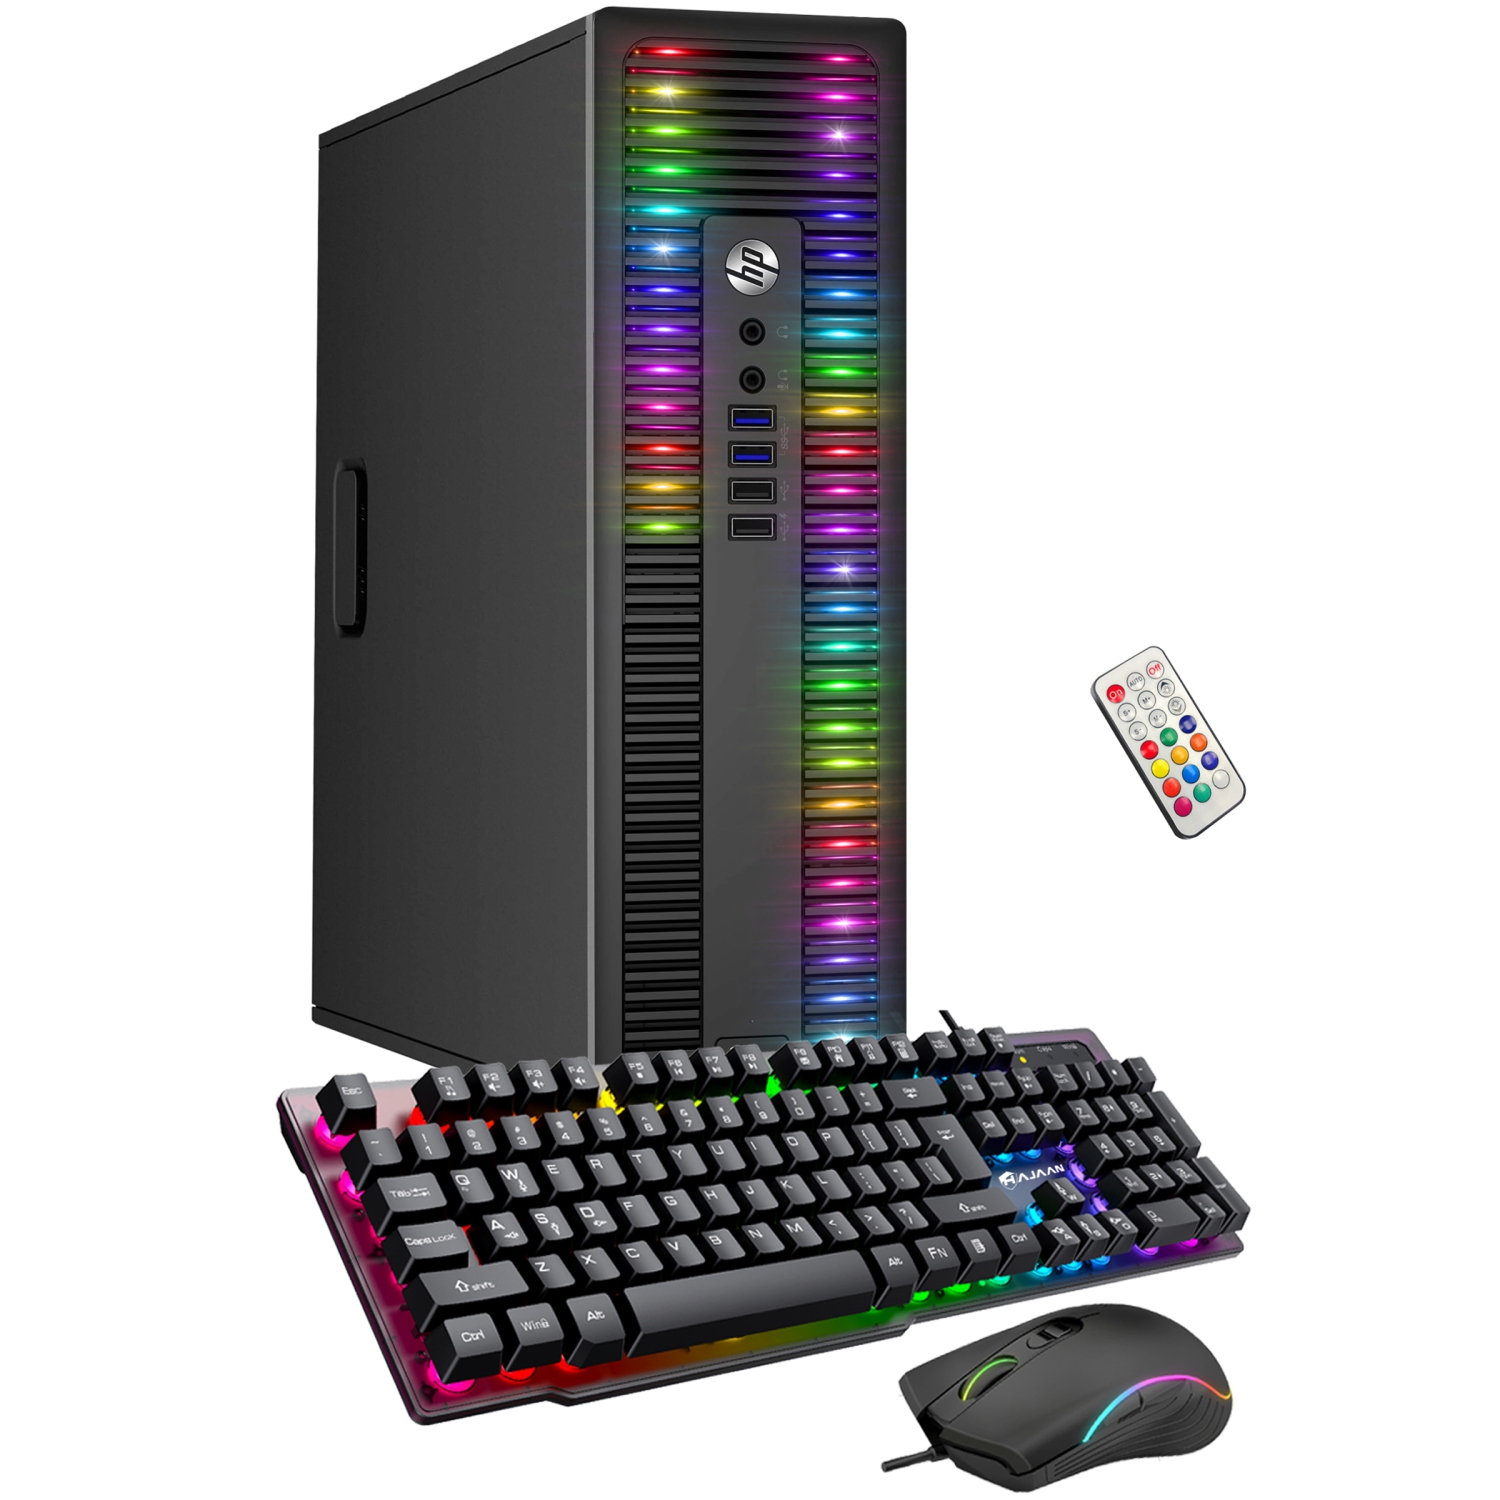 Refurbished (Good) - Gaming PC with RGB Lights - HP ProDesk Desktop PC i7 4th Gen 3.40 GHz NVIDIA GeForce GT 1030 2GB 16GB RAM 1TB SSD Win 10 Pro WIFI, KB Mouse Combo, HDMI